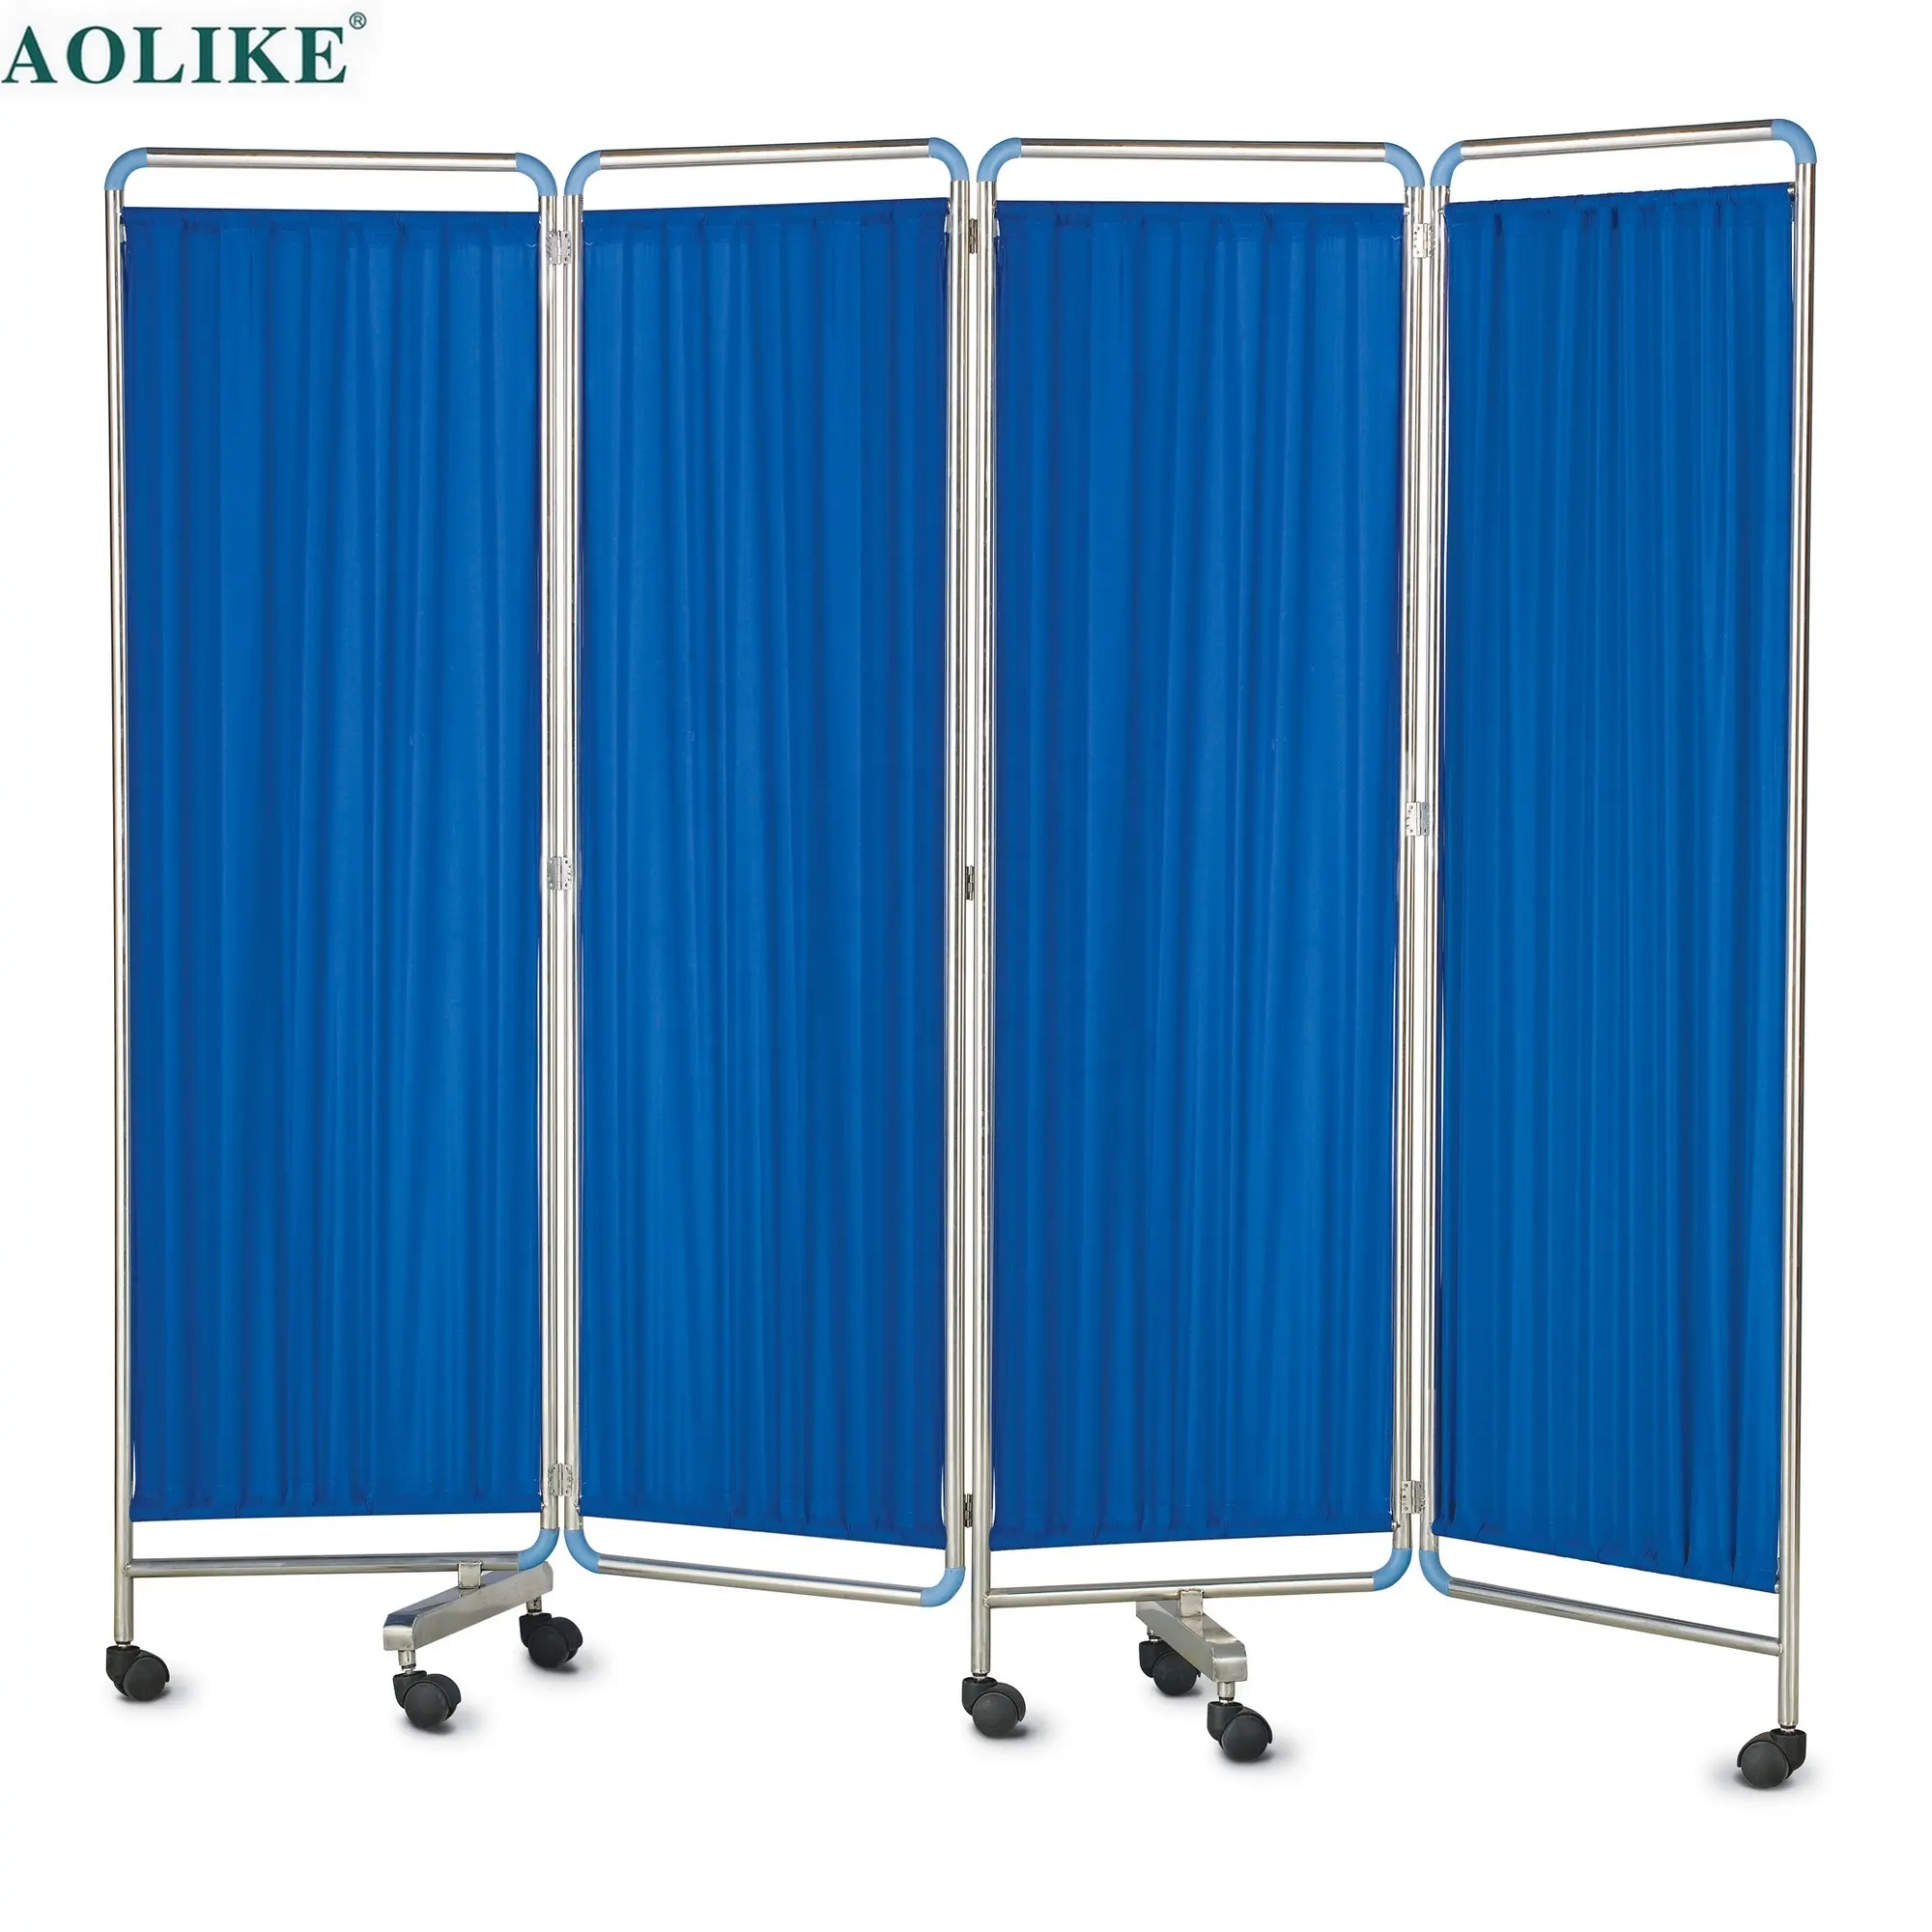 Stainless Steel 4 Section Medical Screen For Hospital ALK06-S01